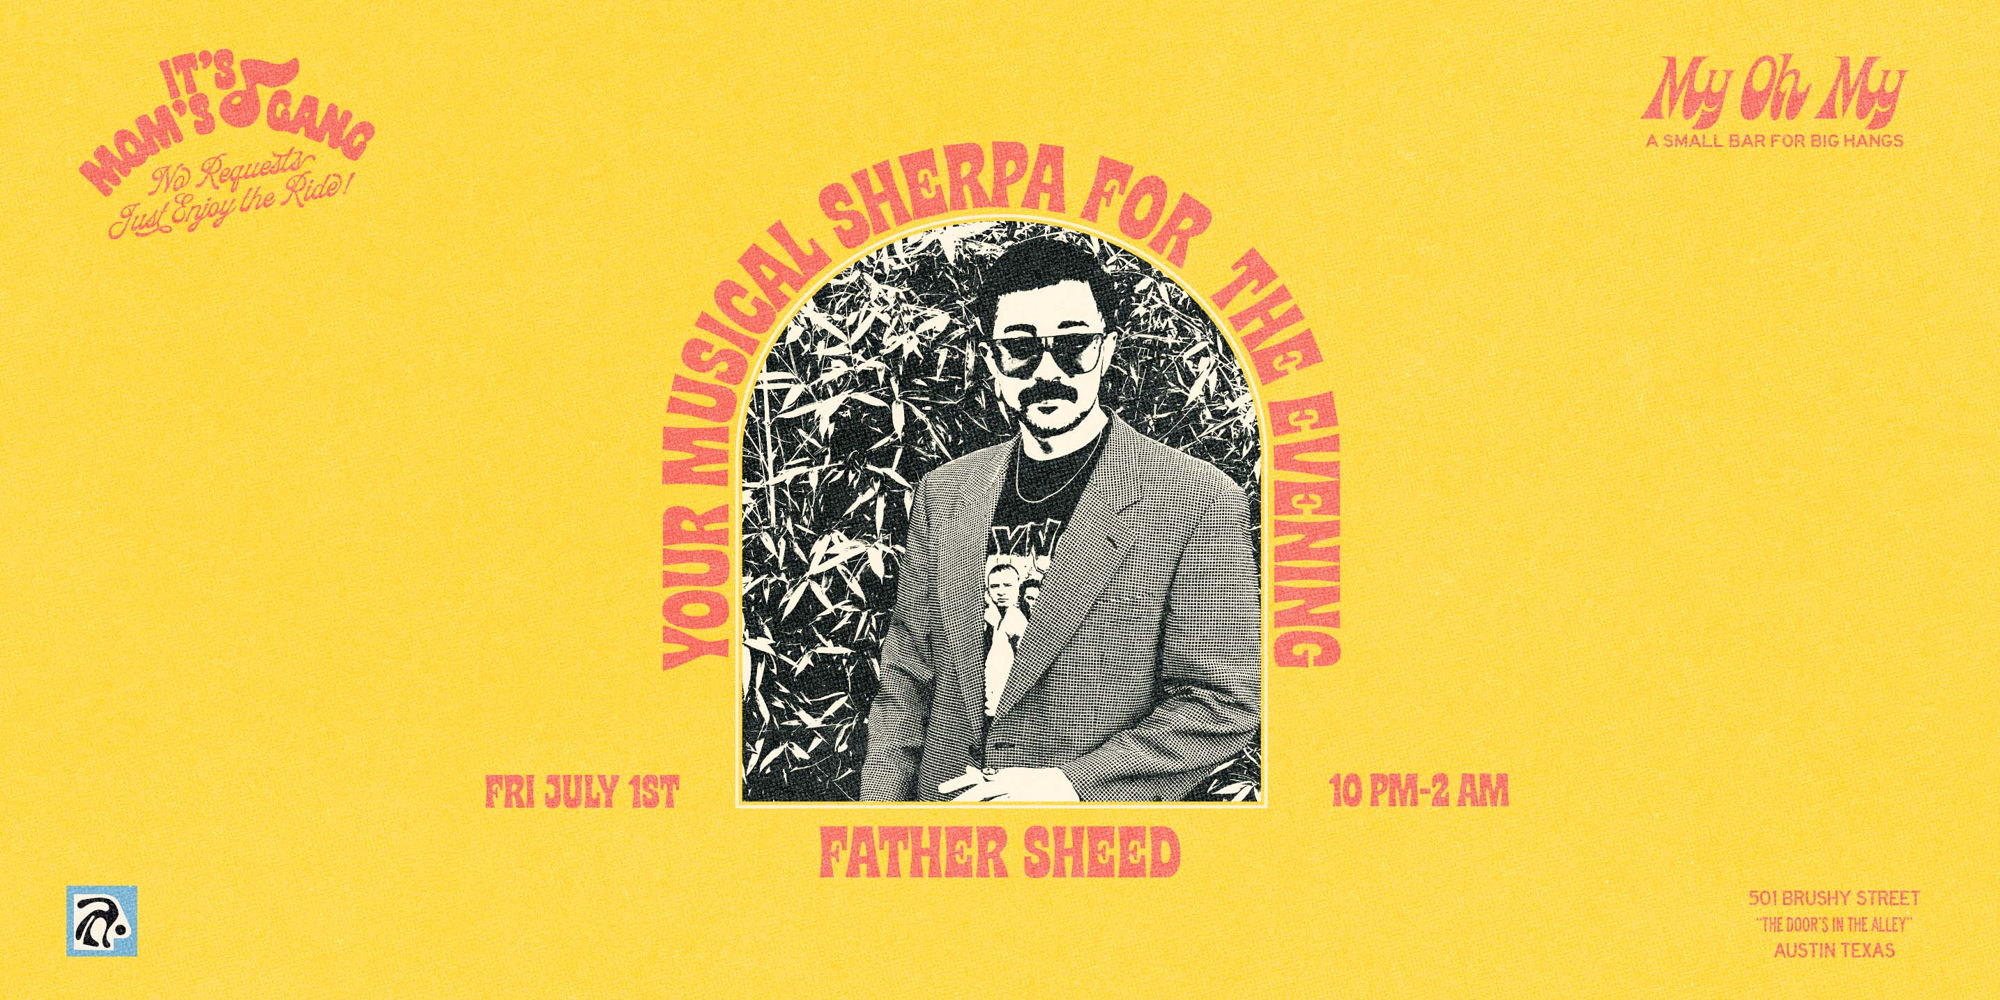 Resound Presents: Father Sheed @ My Oh My on July 1st promotional image